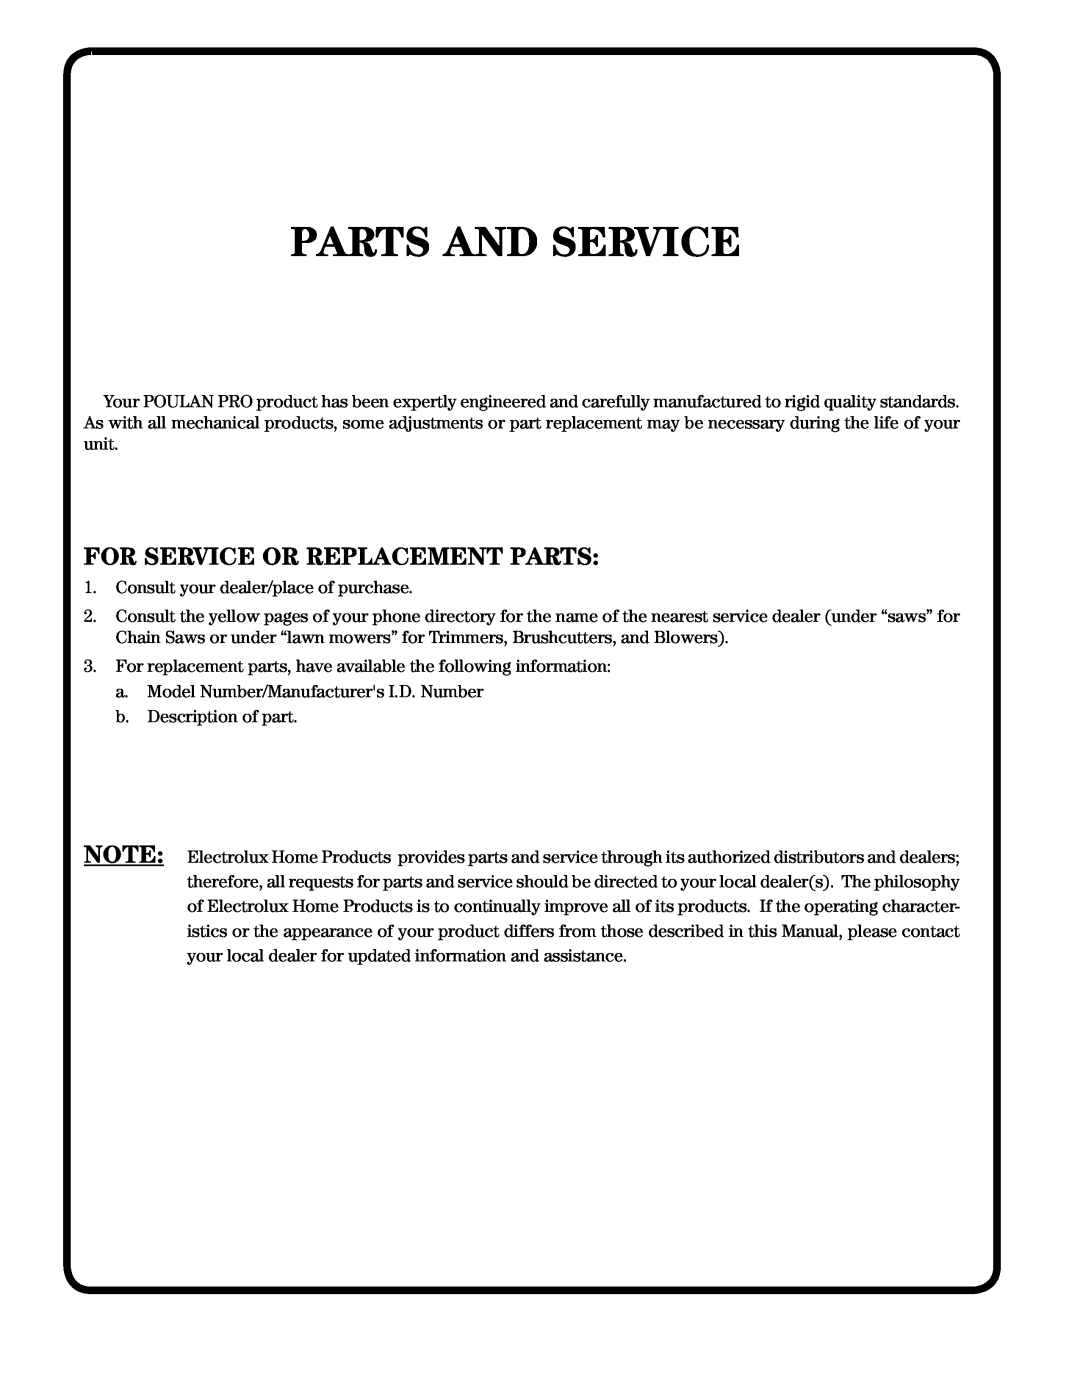 Poulan PRRT65C owner manual Parts And Service, For Service Or Replacement Parts 